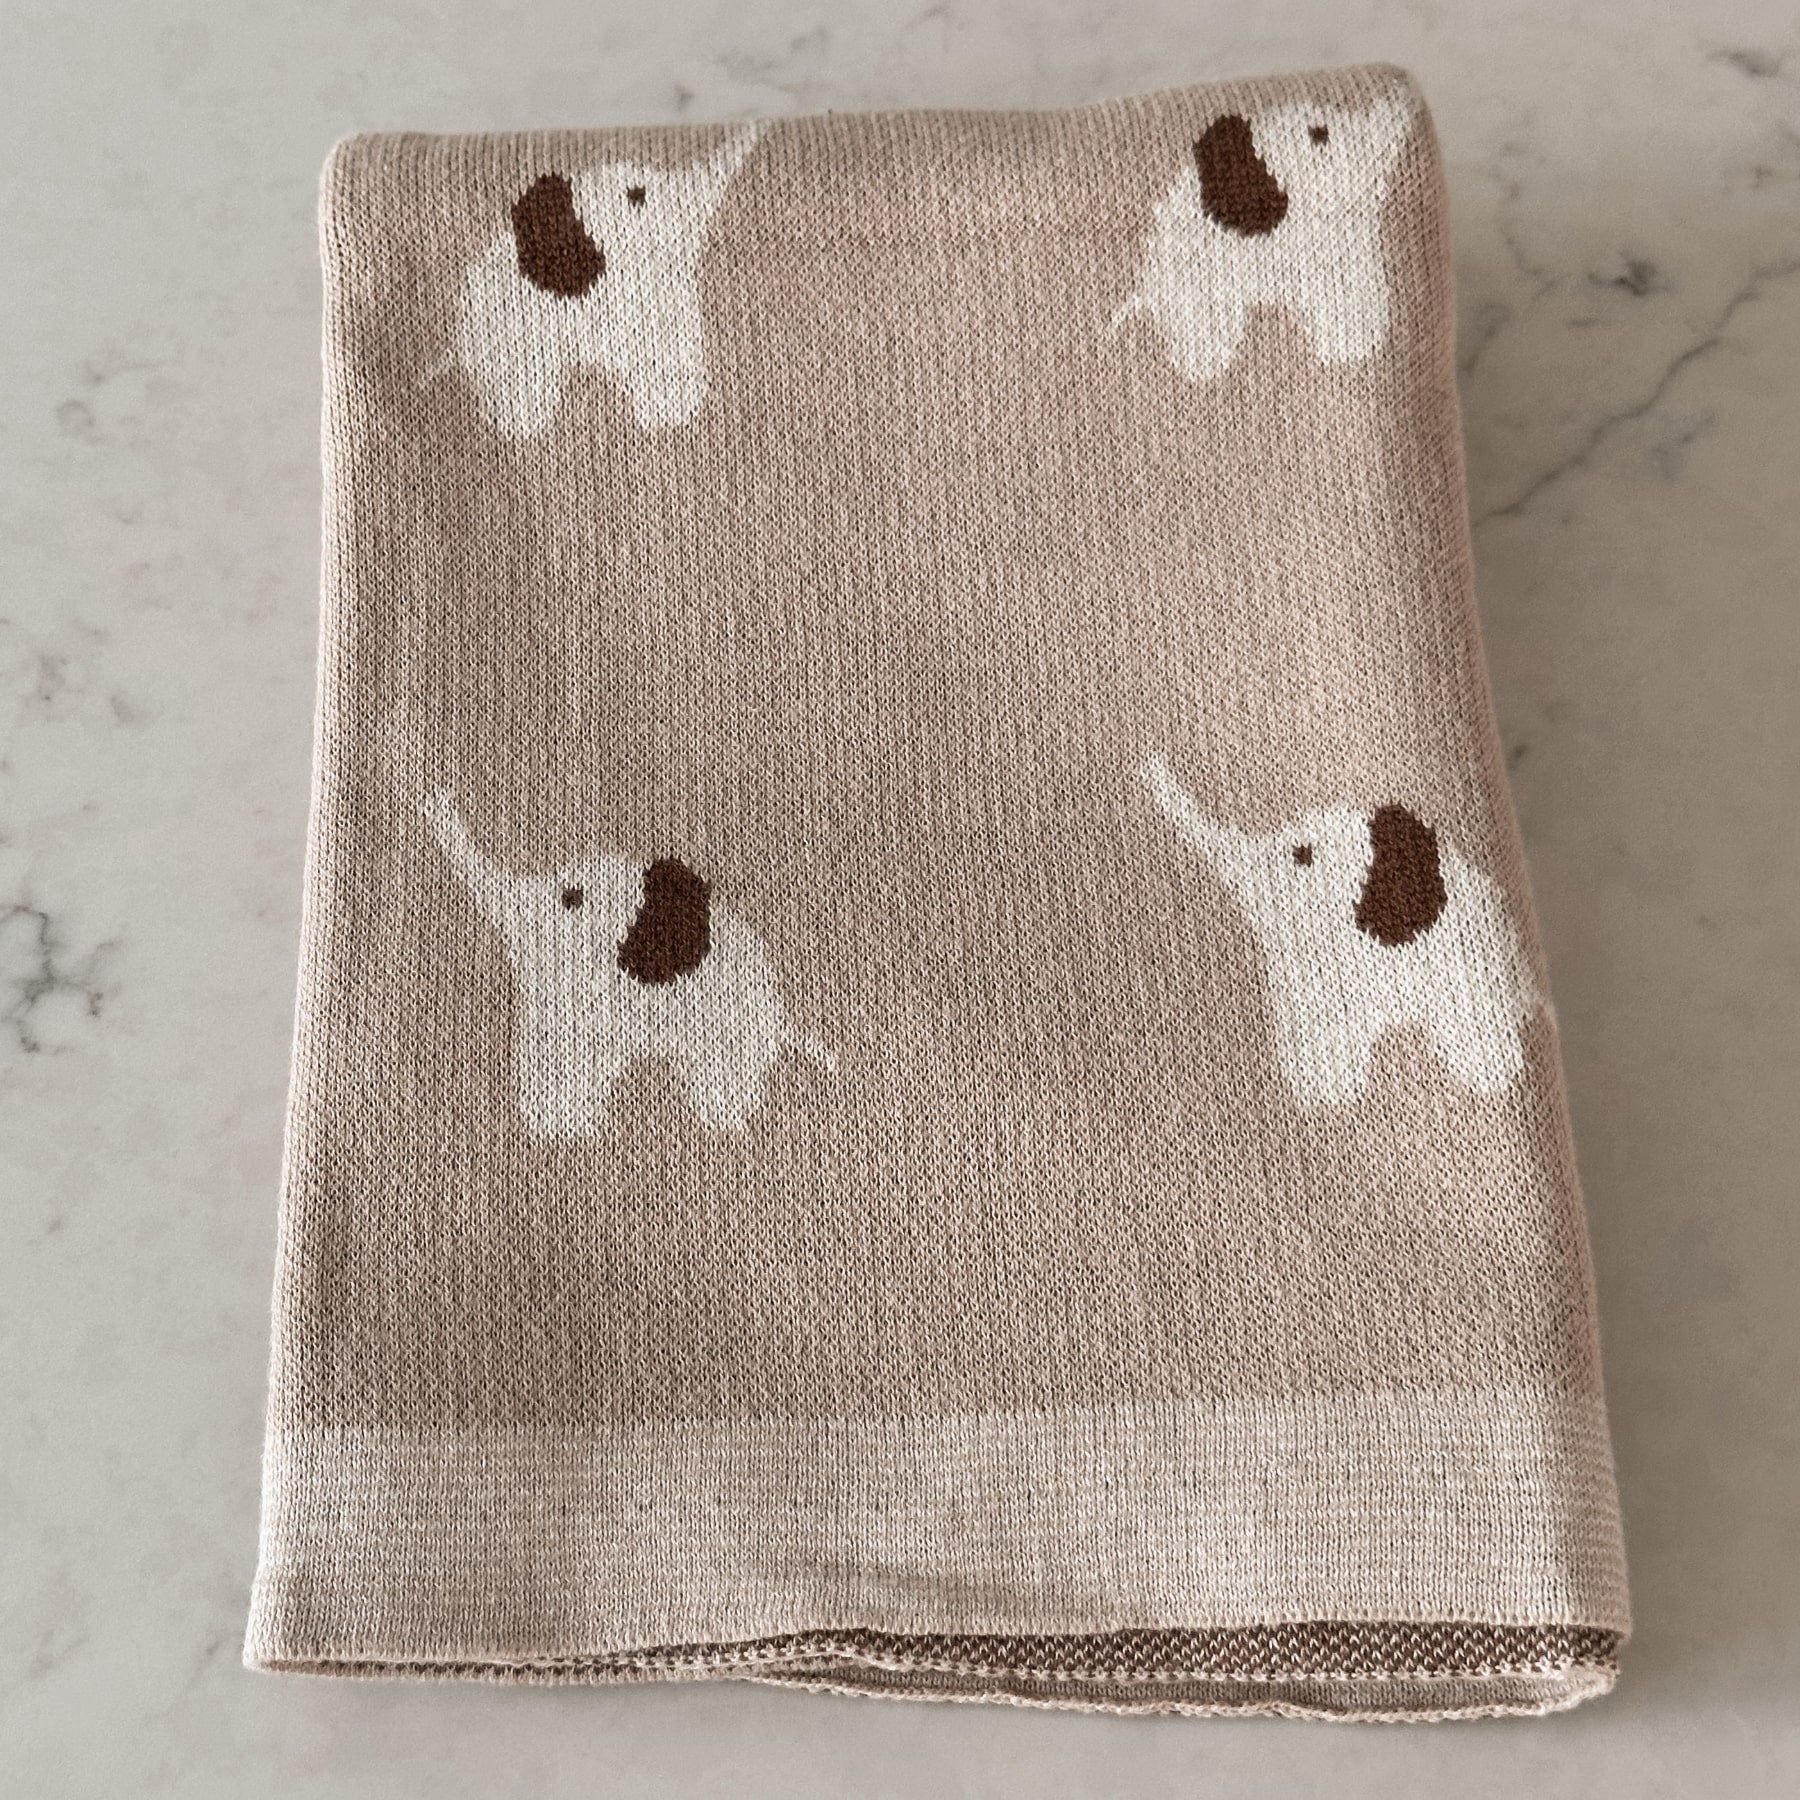 Elephant Baby Blanket - Baby Blankets at Louie Meets Lola